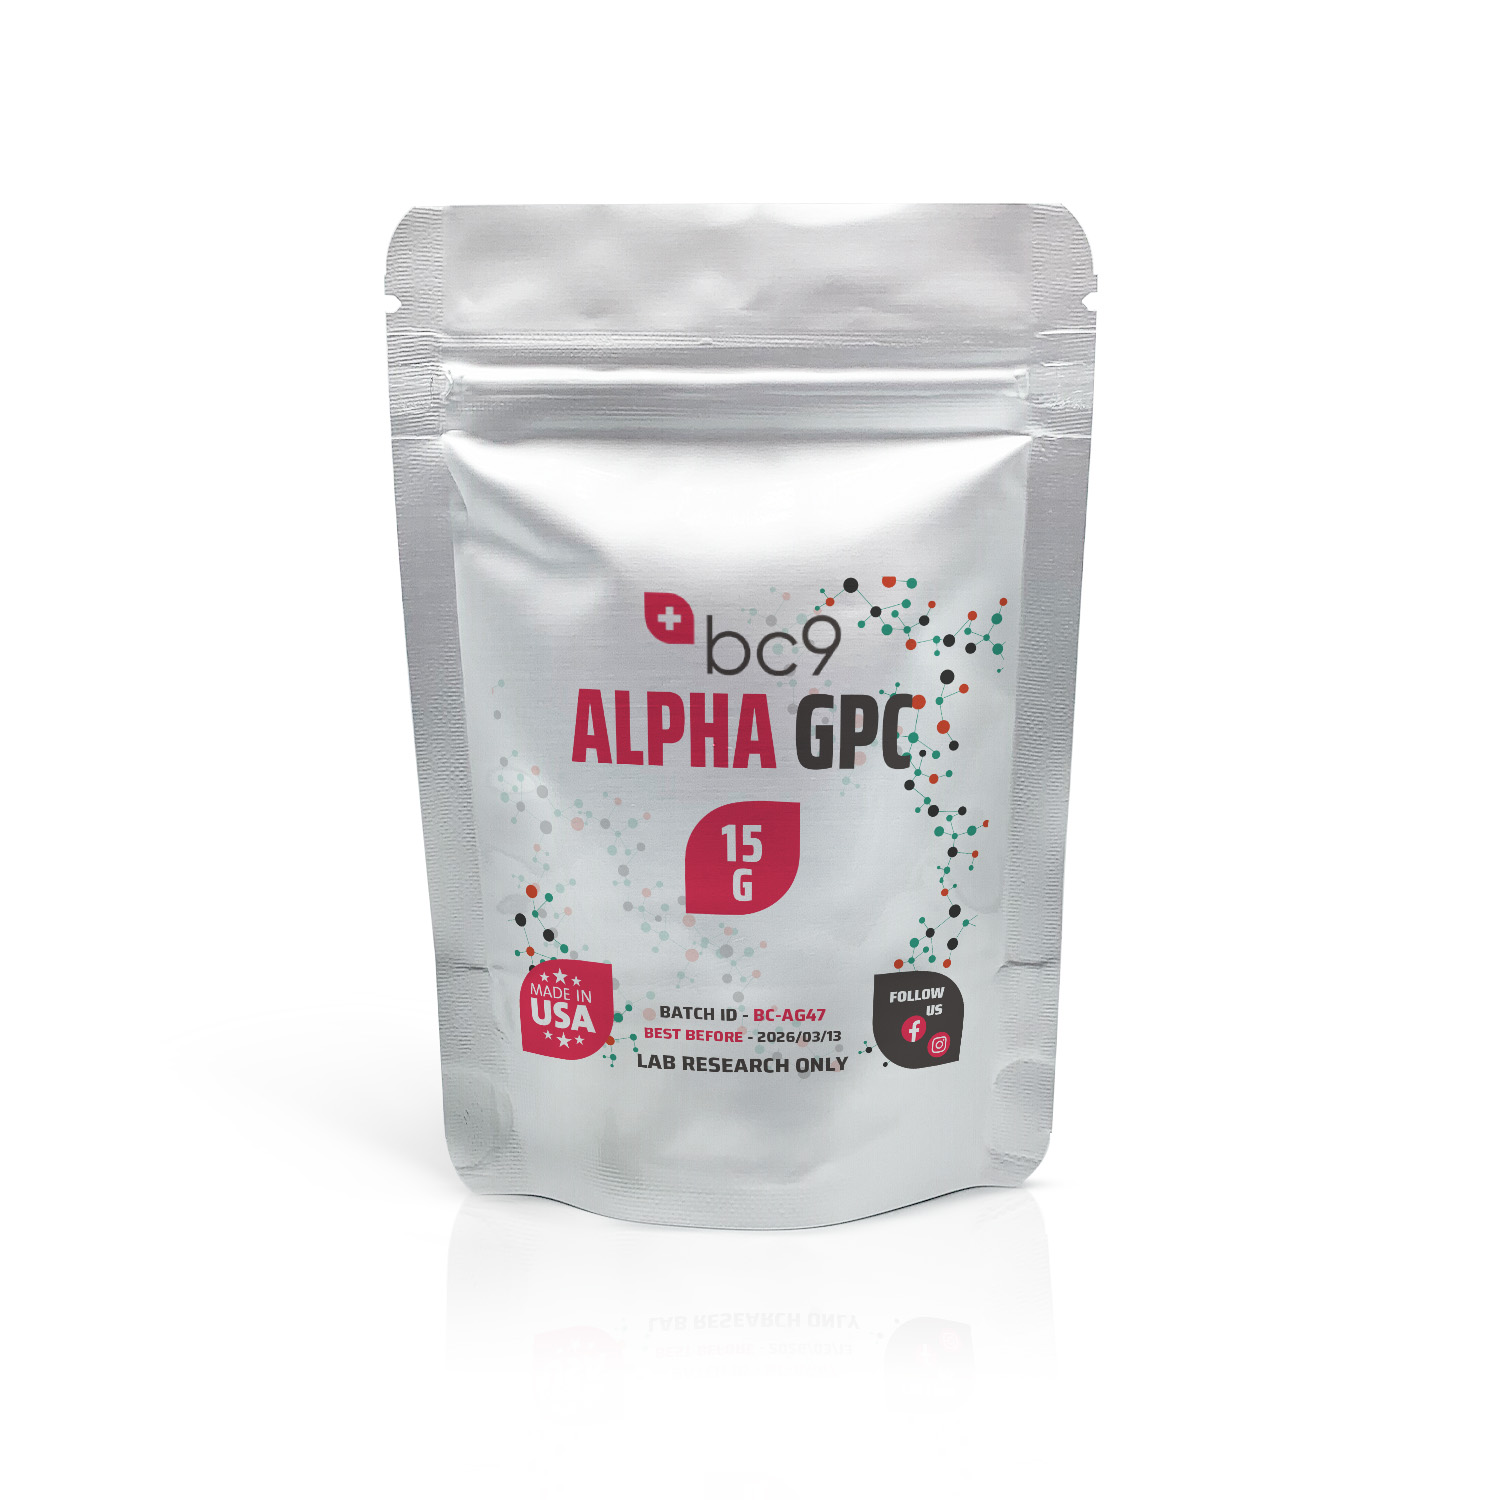 Alpha GPC Powder For Sale | Fast Shipping | BC9.org